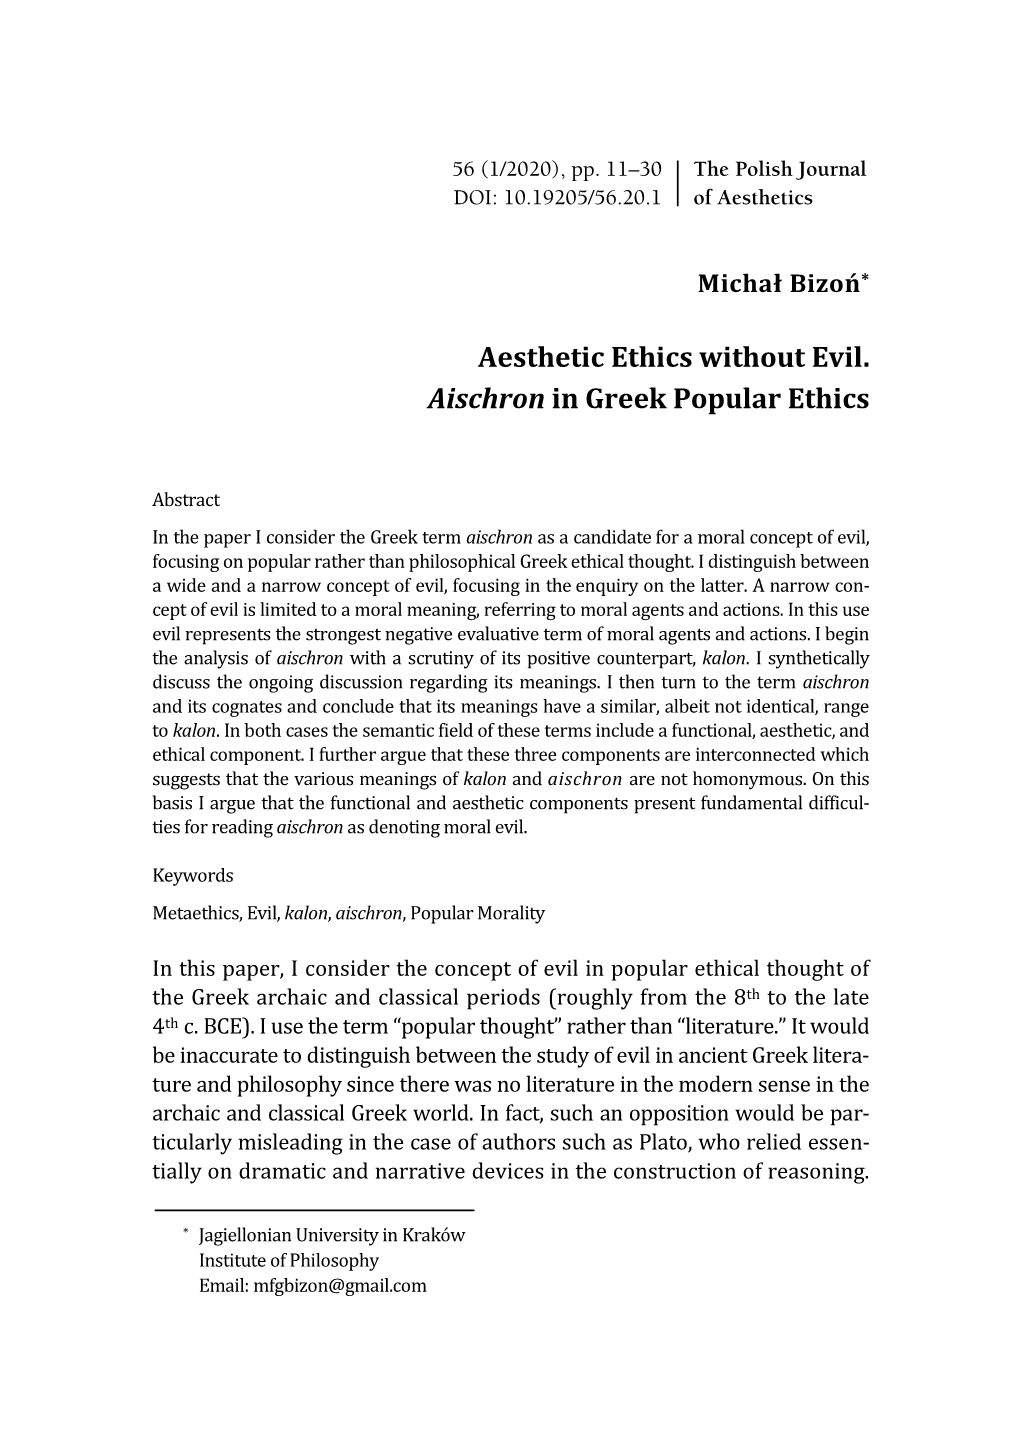 Aesthetic Ethics Without Evil. Aischron in Greek Popular Ethics